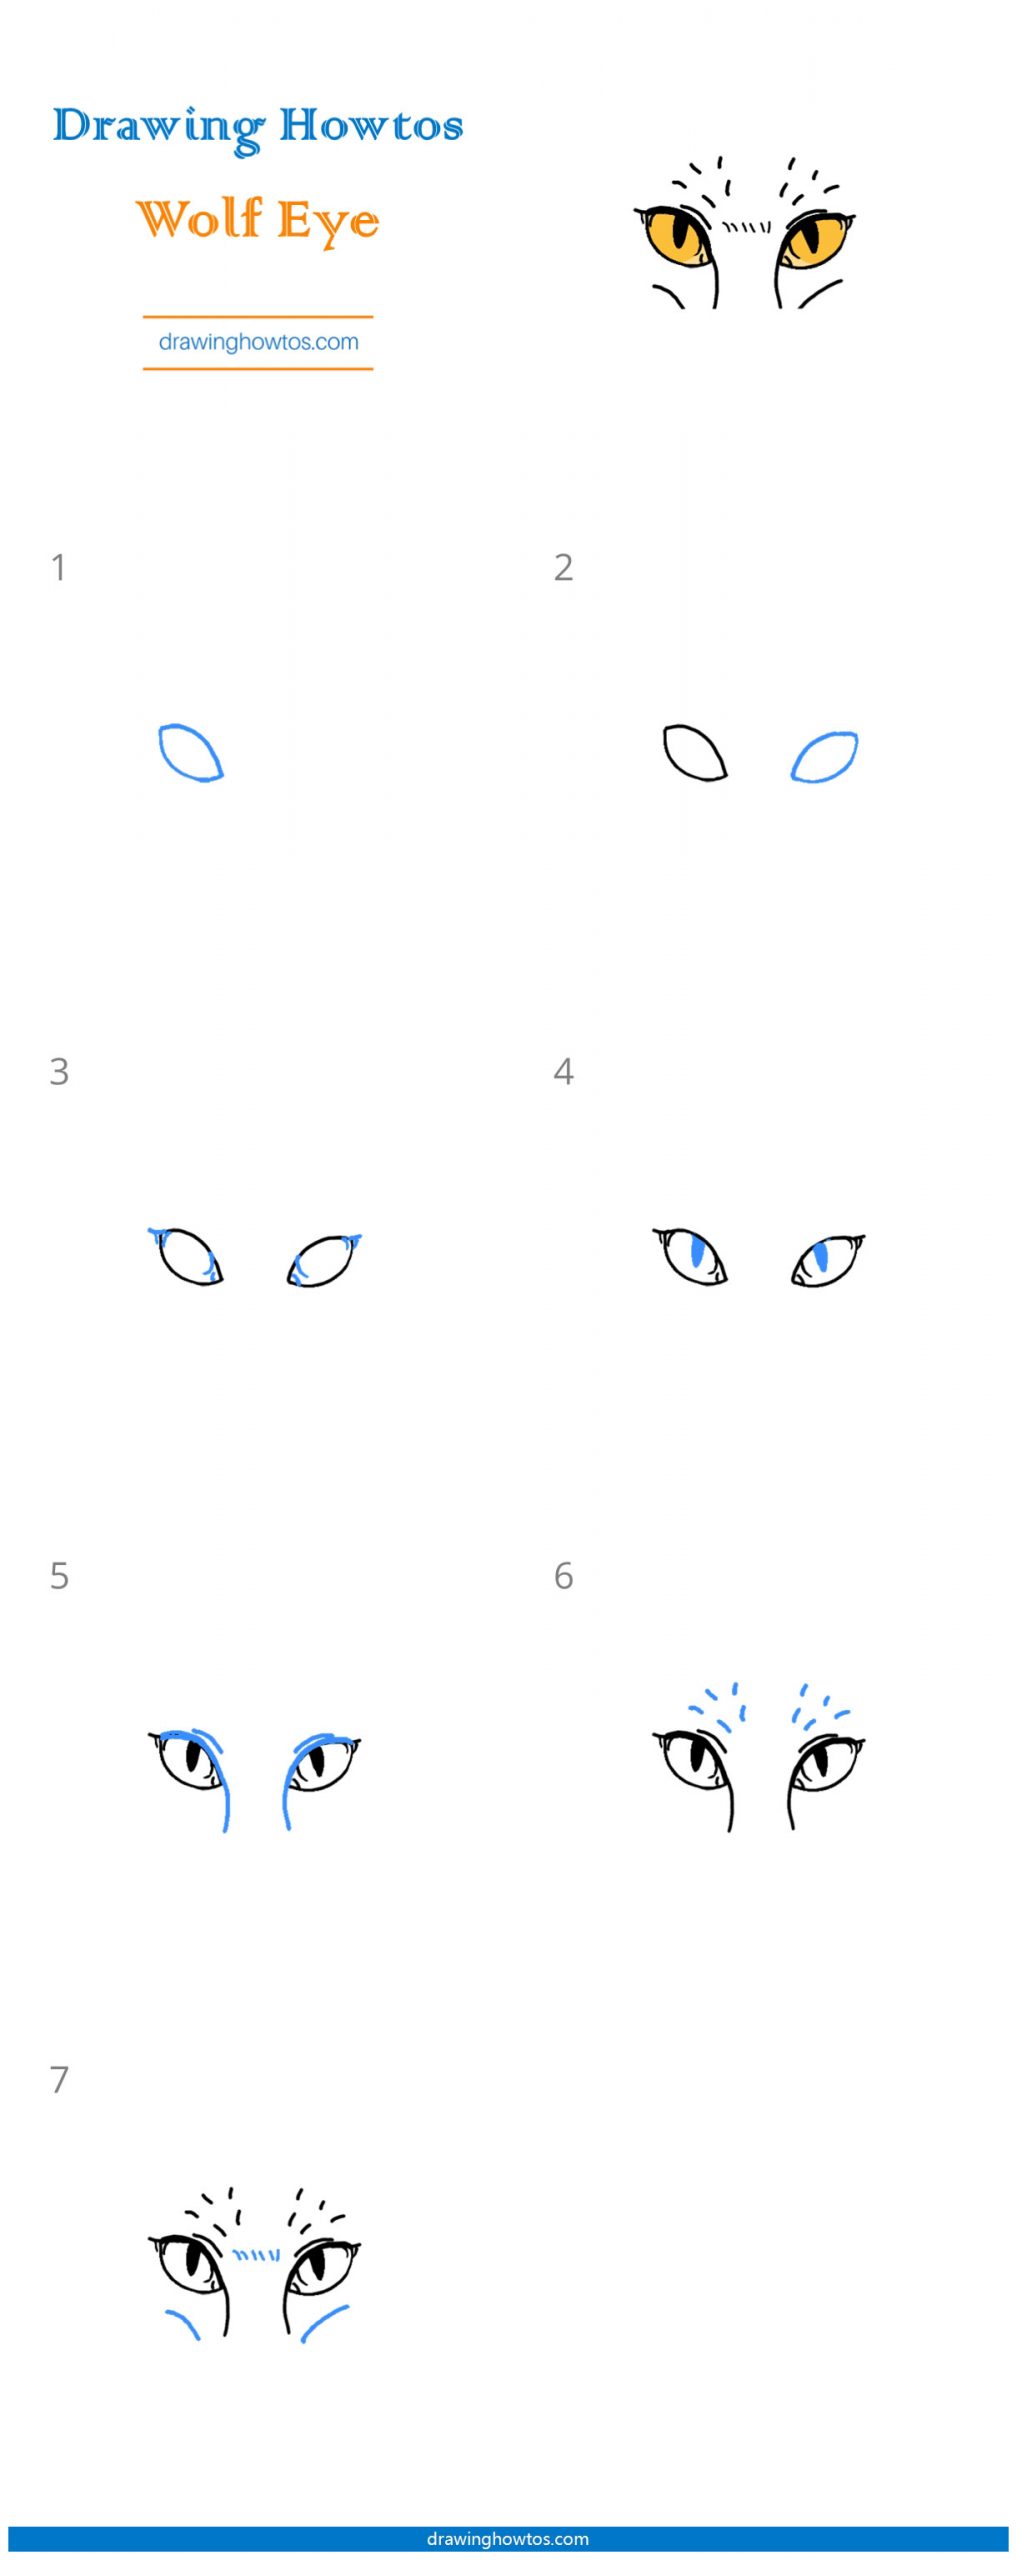 How to Draw Wolf Eyes Step by Step